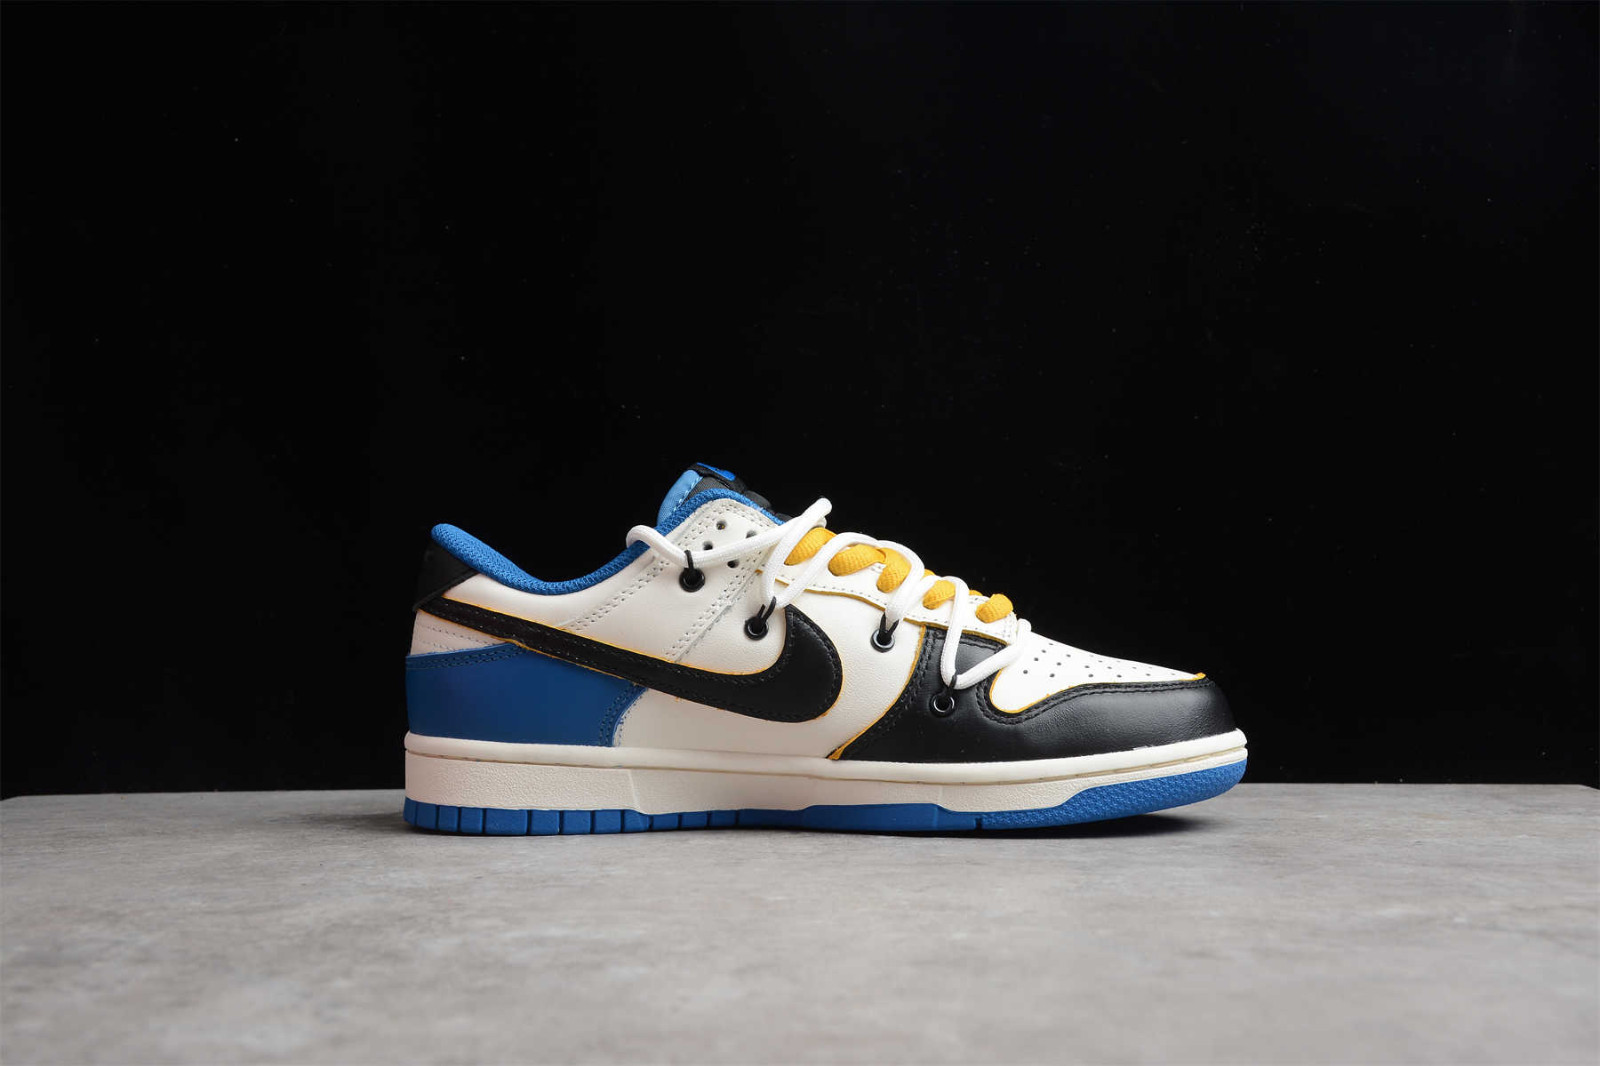 OW x cost Nike SB Dunk Low Retro Royal Blue DD1391 - - cost nike air zoom indoor amazon shoes store hours - MultiscaleconsultingShops